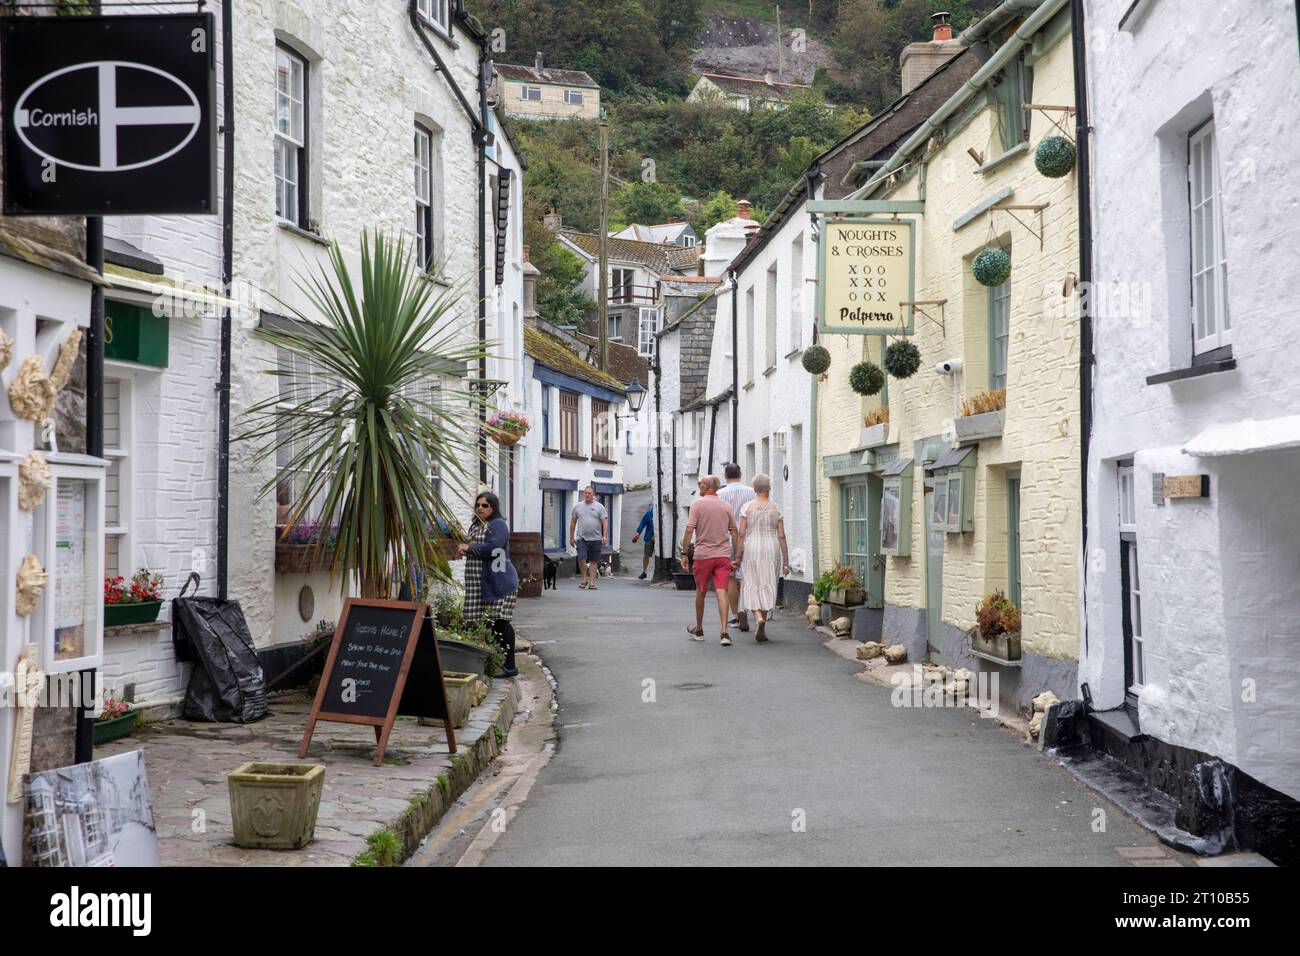 Polperro village in Cornwall, narrow street lane of village cottages and homes along with the Cornish flag standard,Cornwall,England,UK,2023 Stock Photo